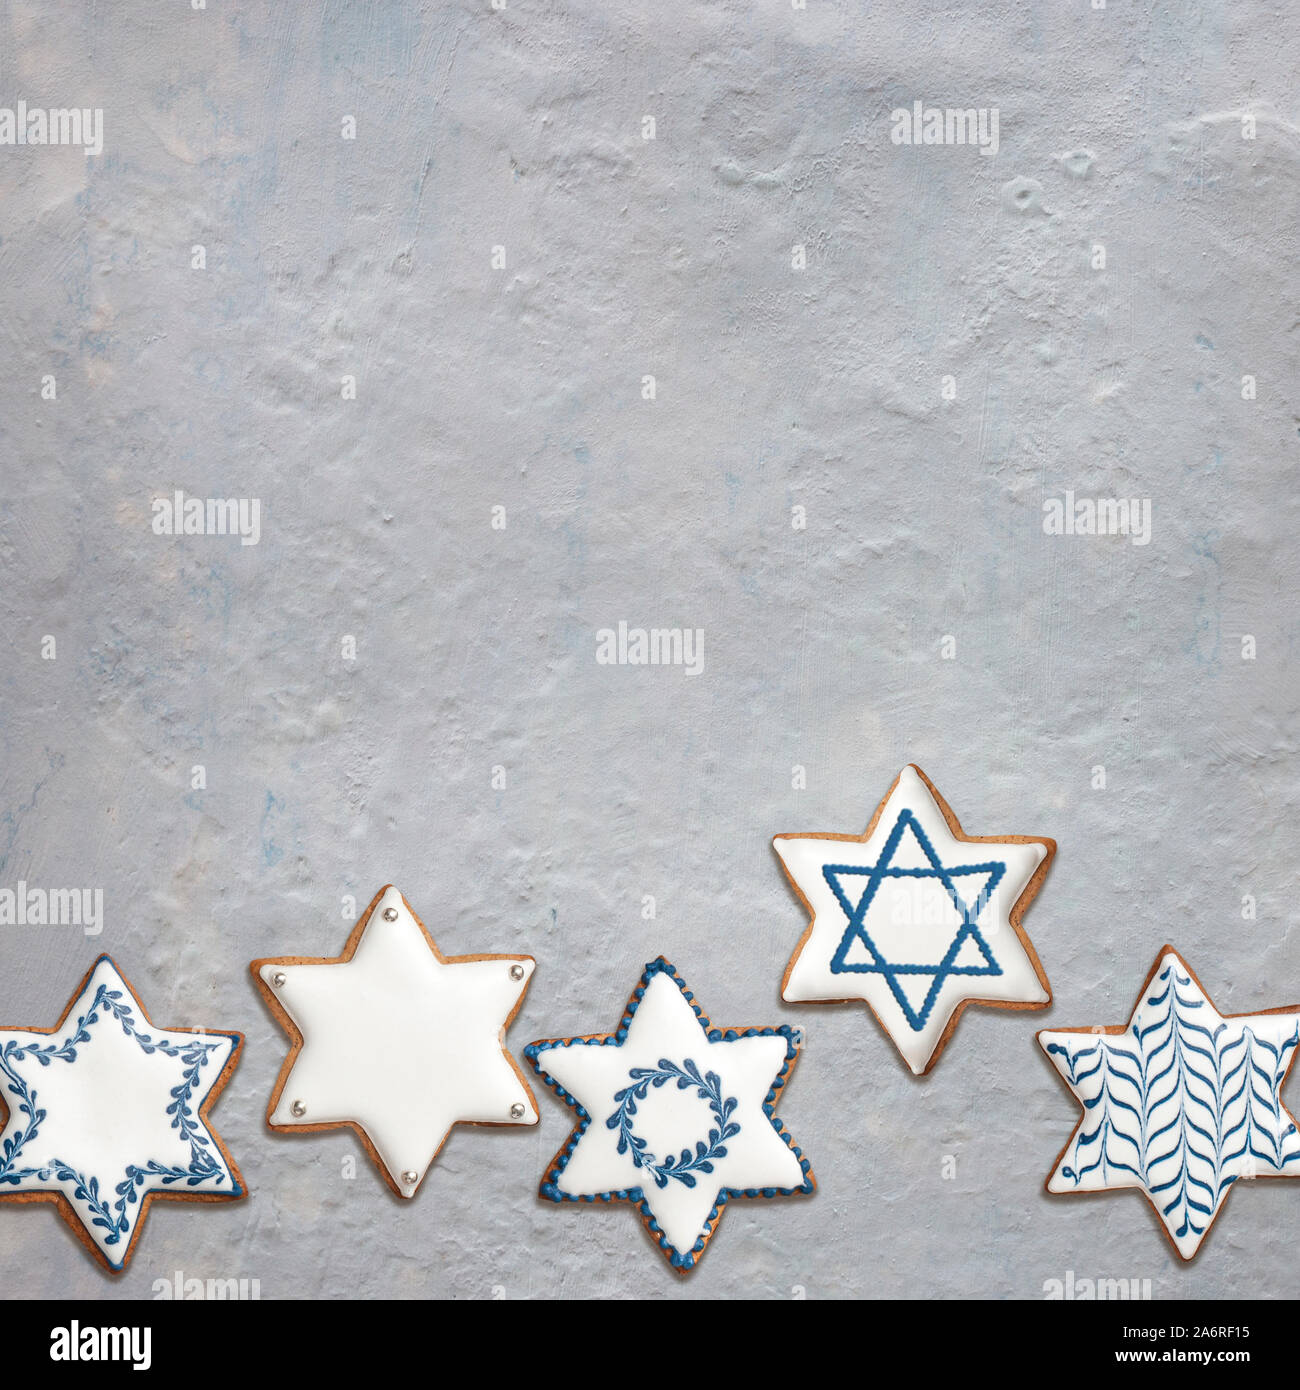 Star shaped artisanal gingerbread cookies for Chanukkah or Bar Mitzvah party. Empty space for your text. Stock Photo